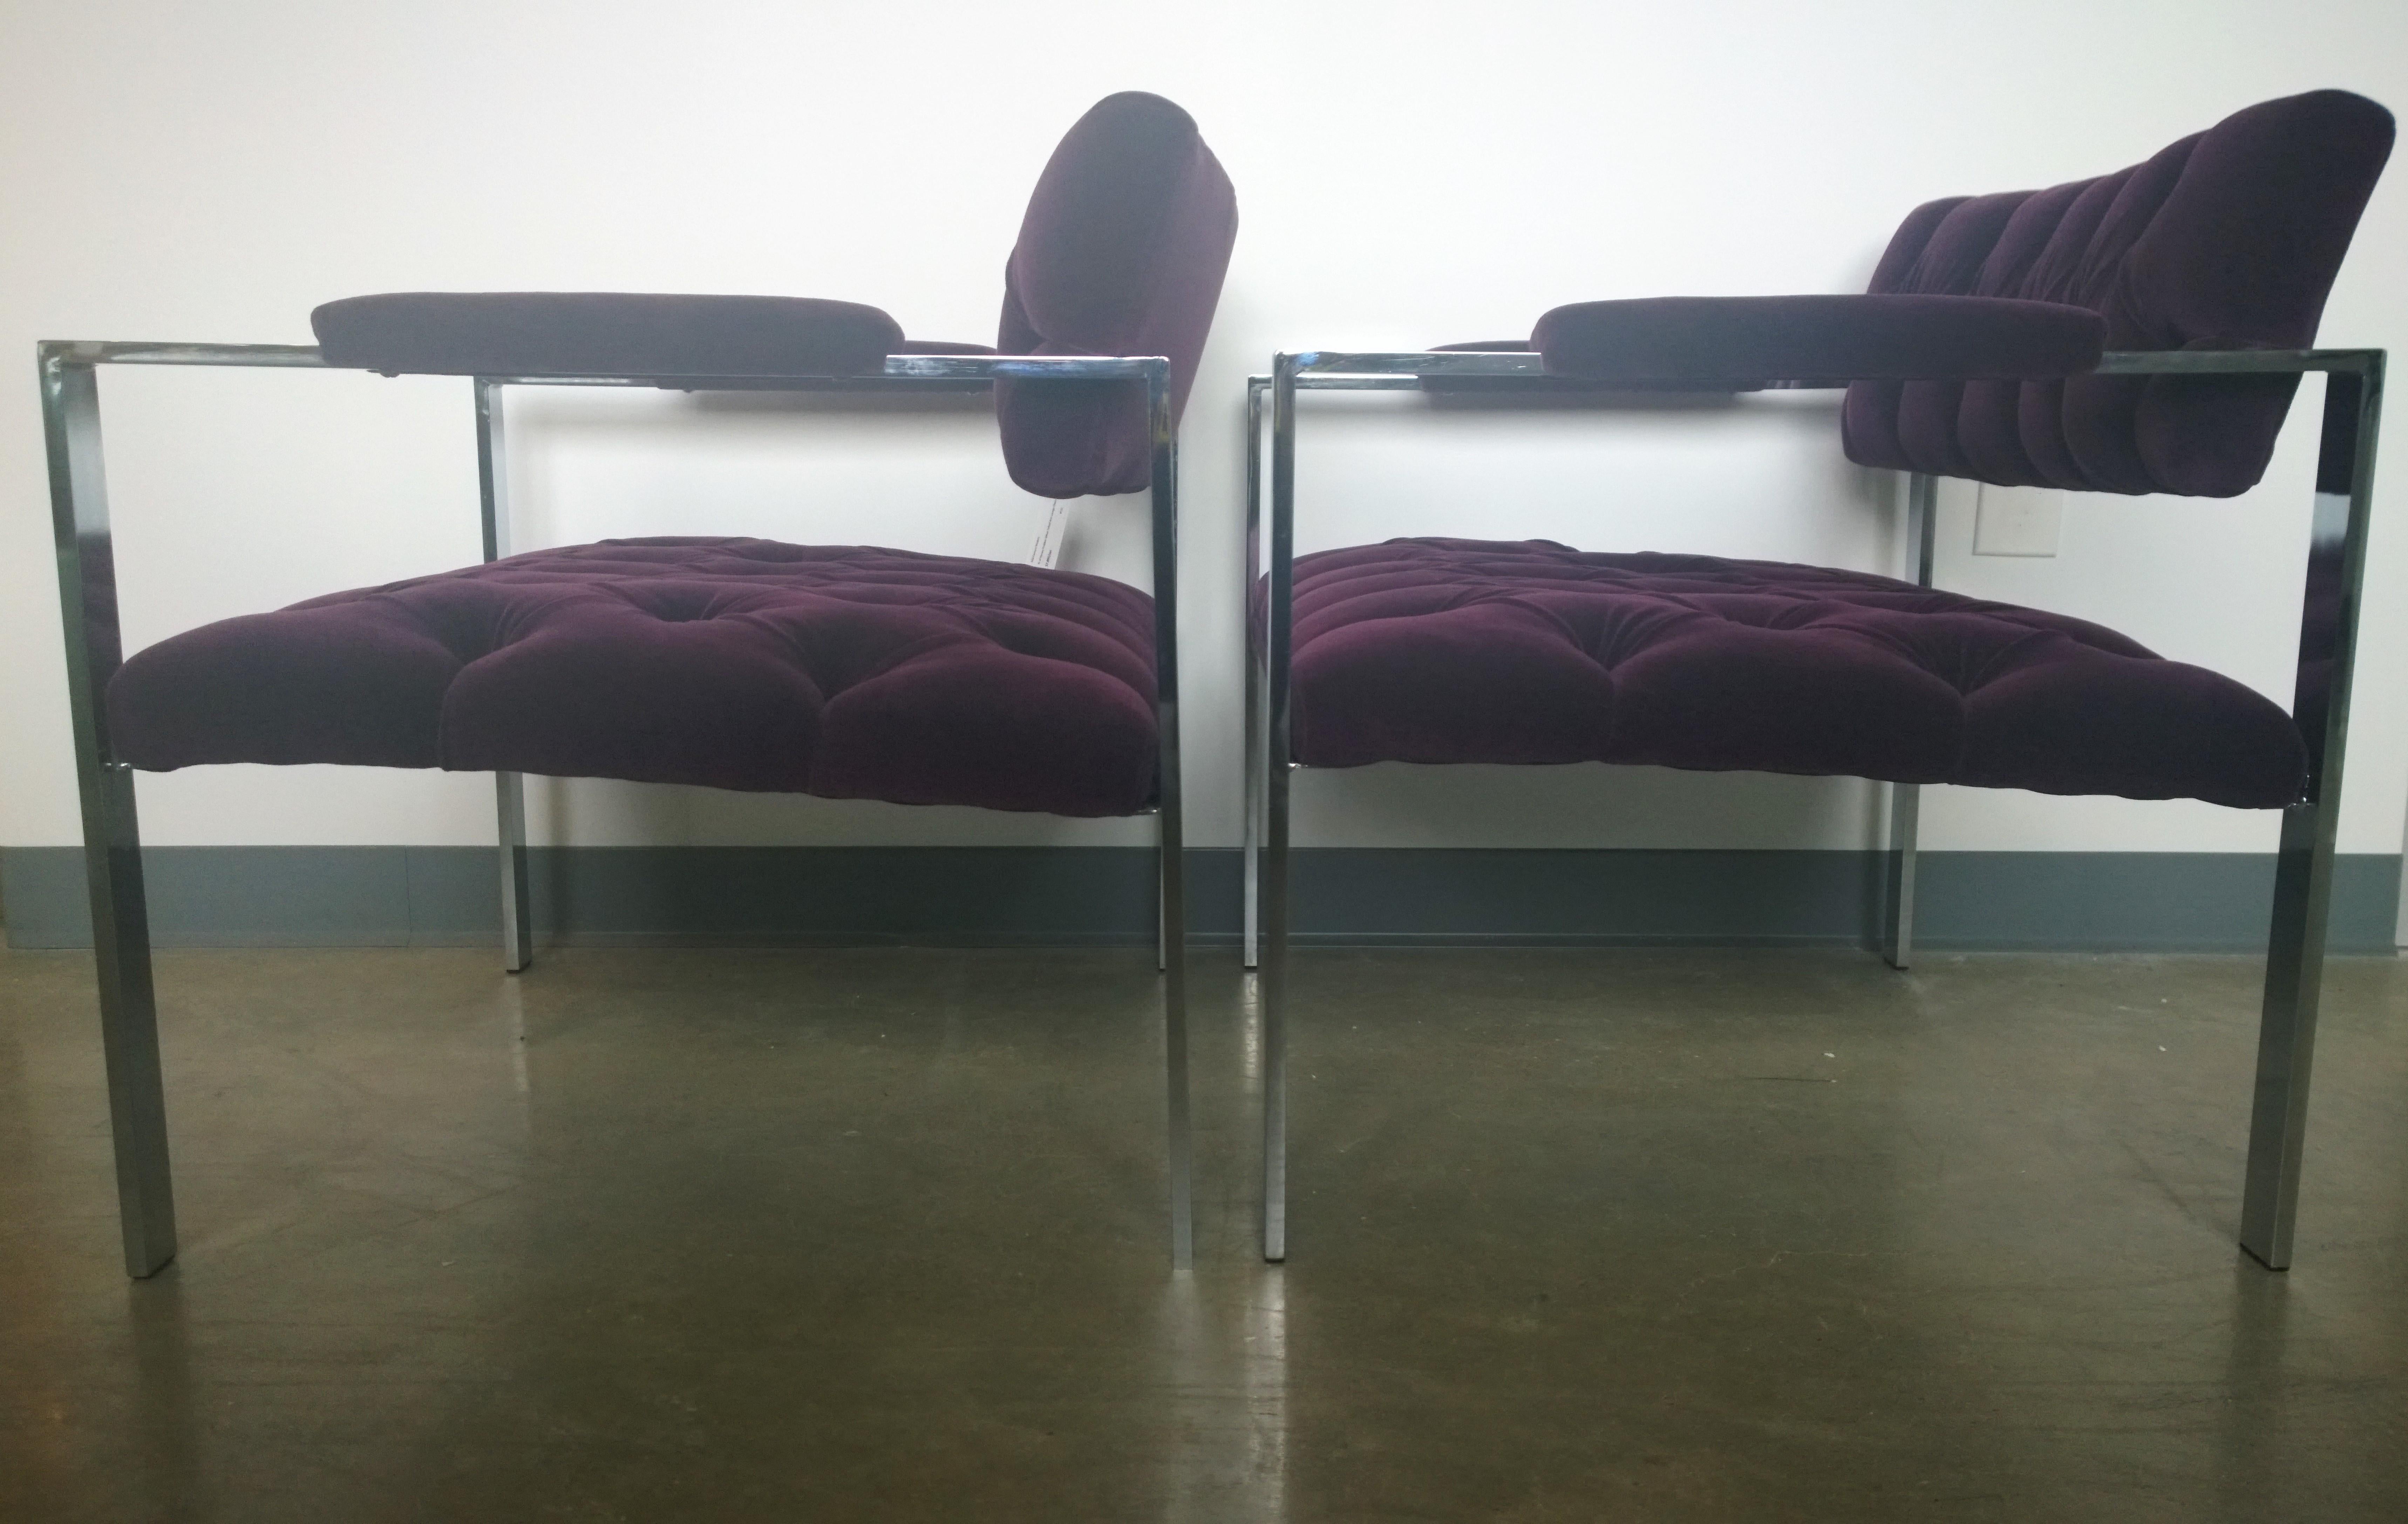 Pair of Erwin-Lambeth Chrome and New Deep Purple Velvet Tufted Arm Lounge Chairs In Good Condition For Sale In Houston, TX